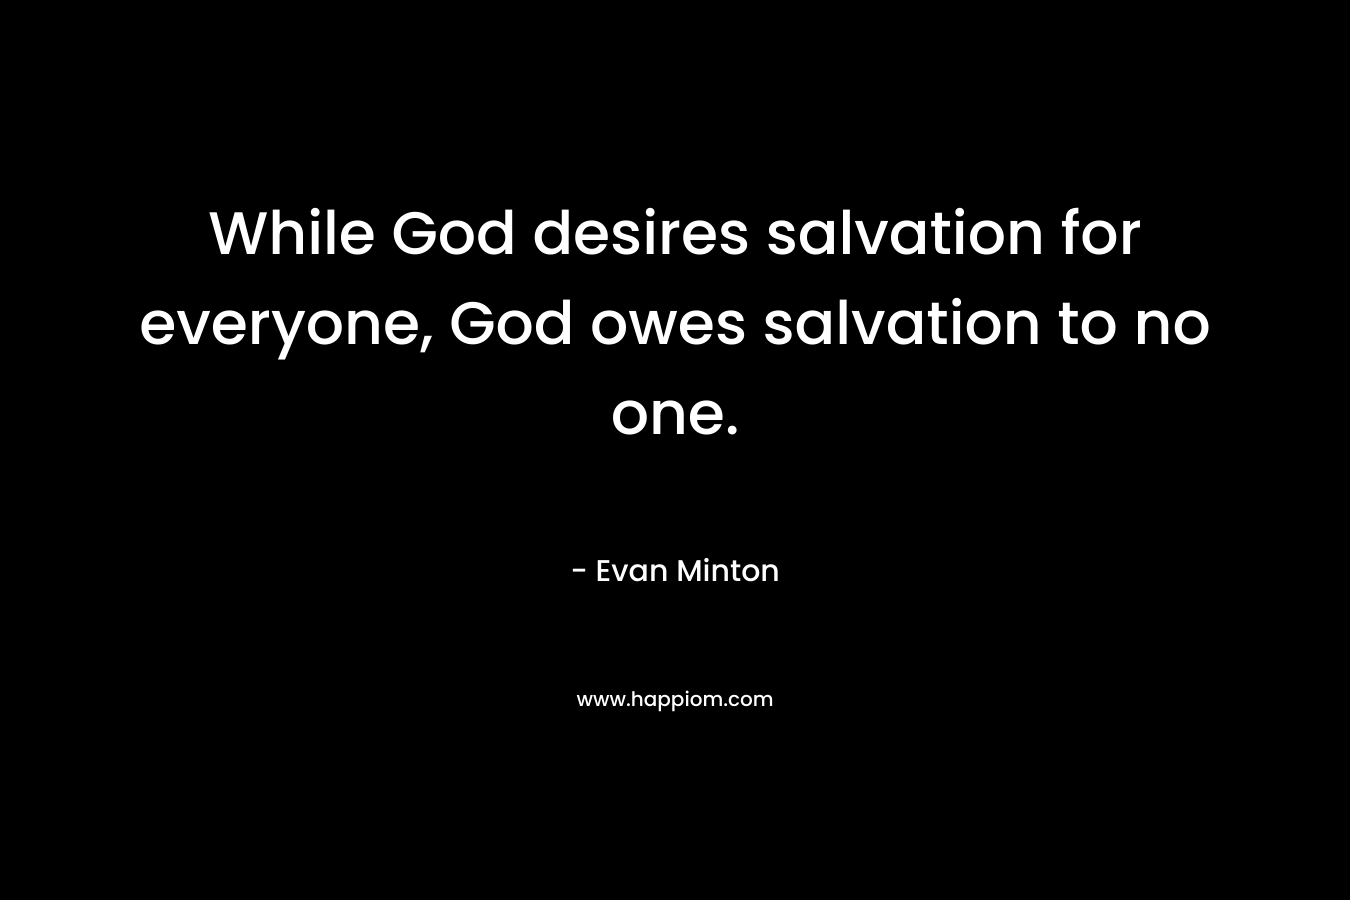 While God desires salvation for everyone, God owes salvation to no one. – Evan Minton